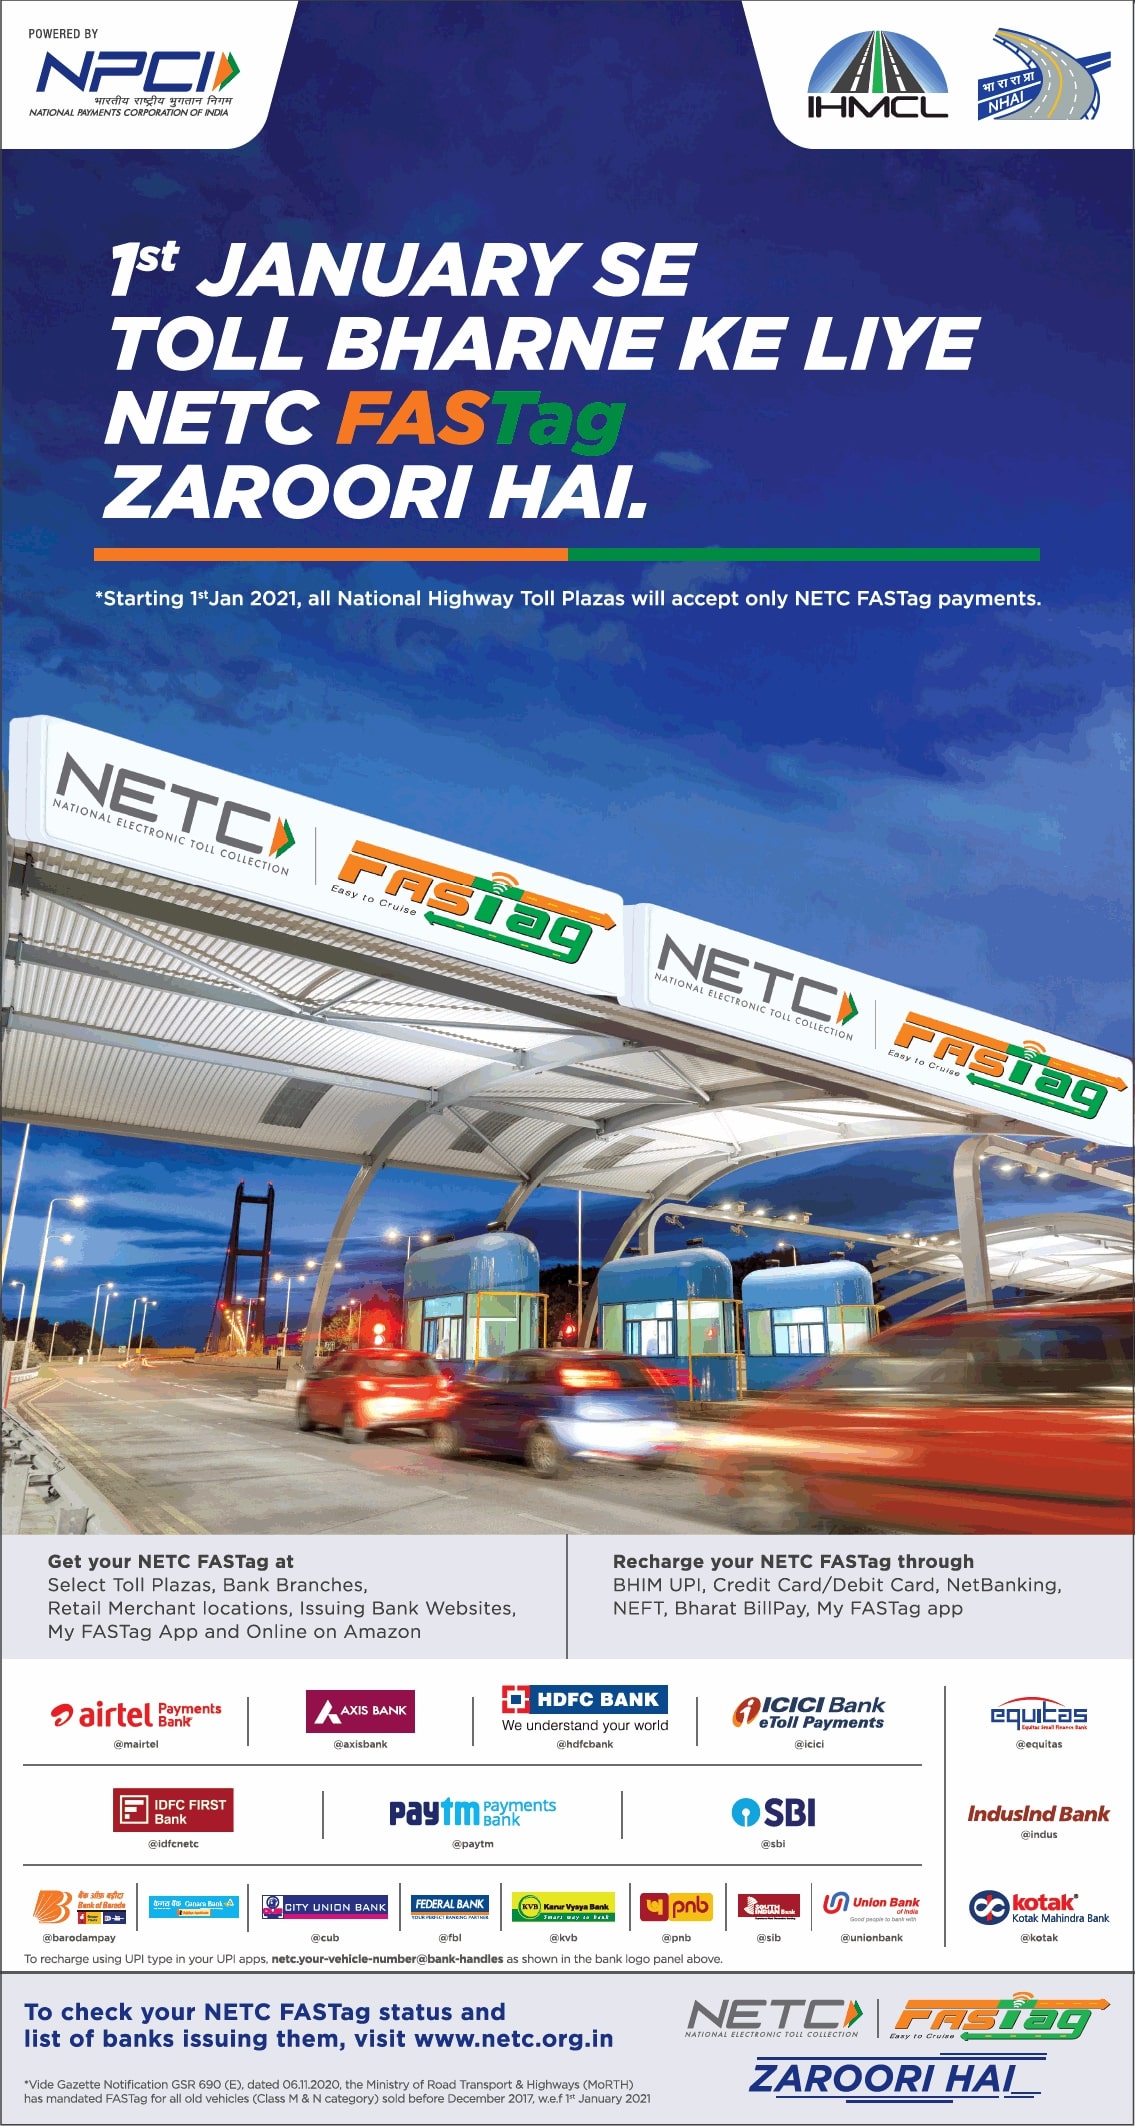 npci-starting-1st-jan-2021-all-national-highway-toll-plazas-will-accept-only-netc-fastag-payments-ad-toi-delhi-26-12-2020